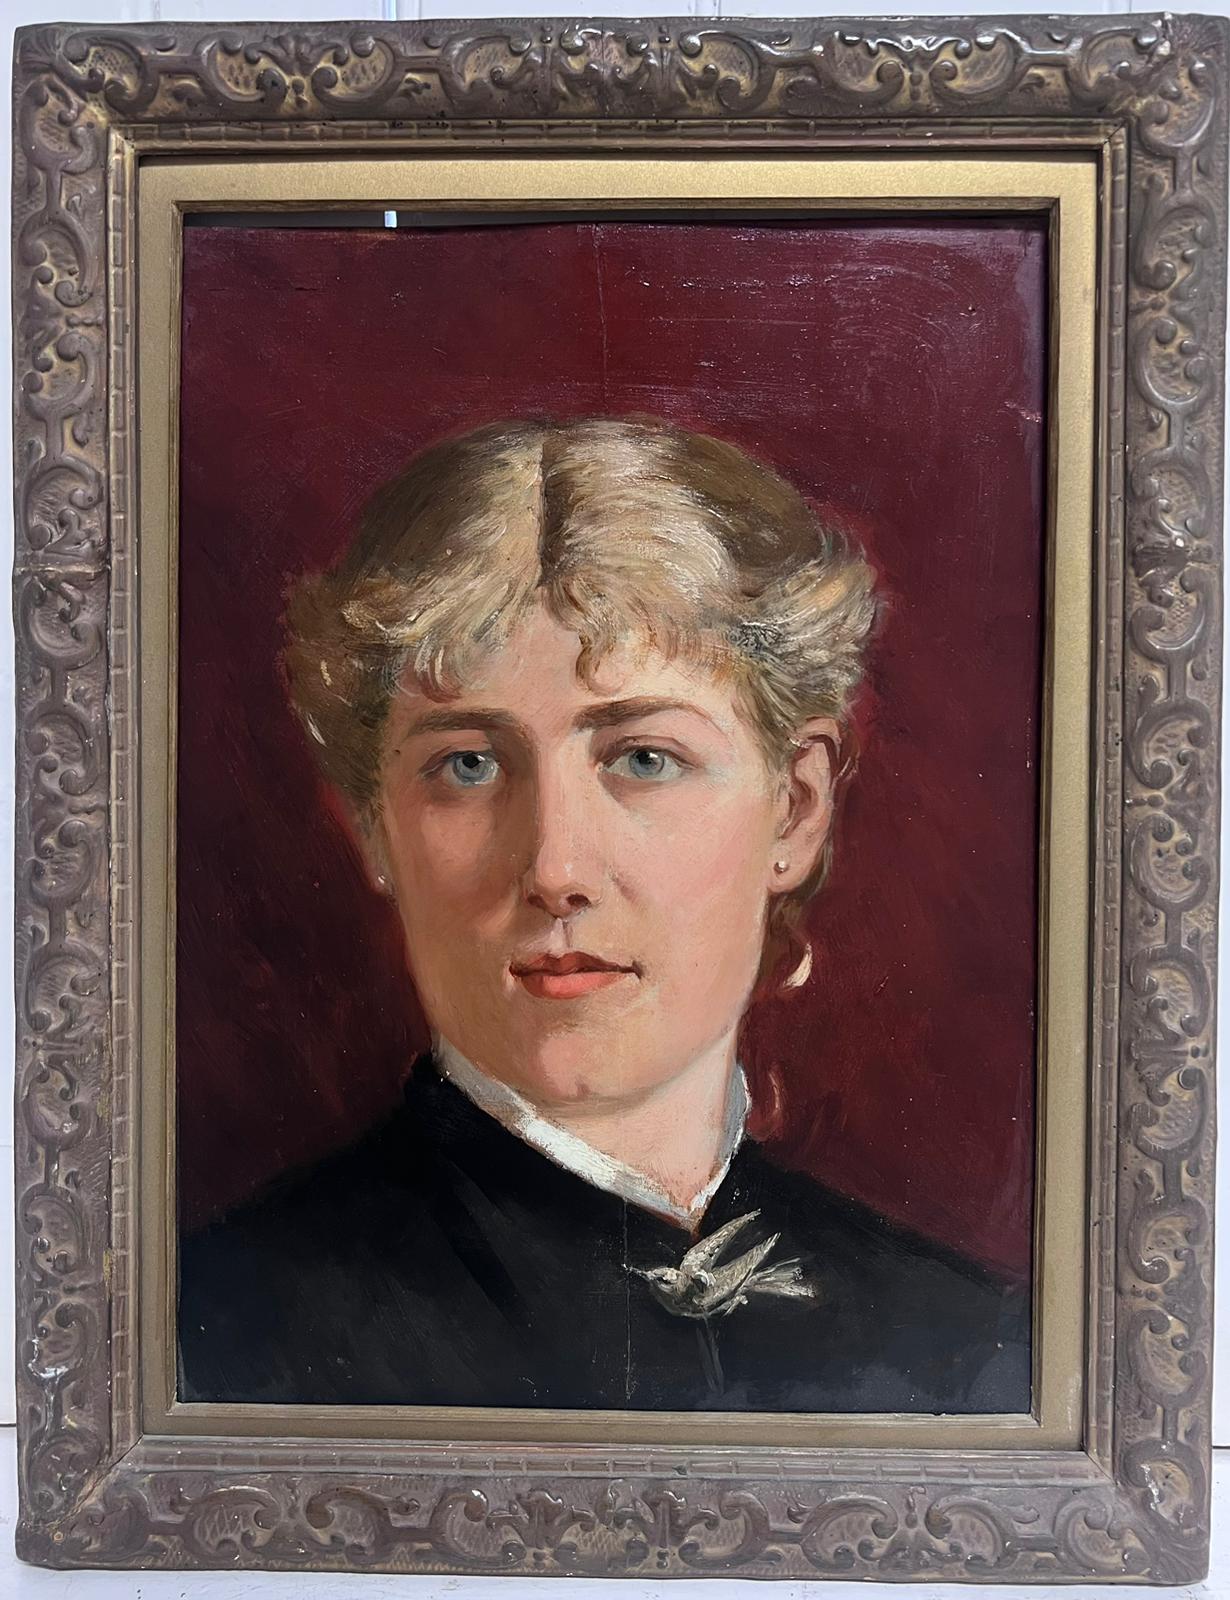 Portrait of a Lady with Earrings
French School, early 1900's
oil on board, framed
framed: 16 x 12 inches
board: 13 x 9.5 inches
provenance: private collection, France
condition: very good and sound condition